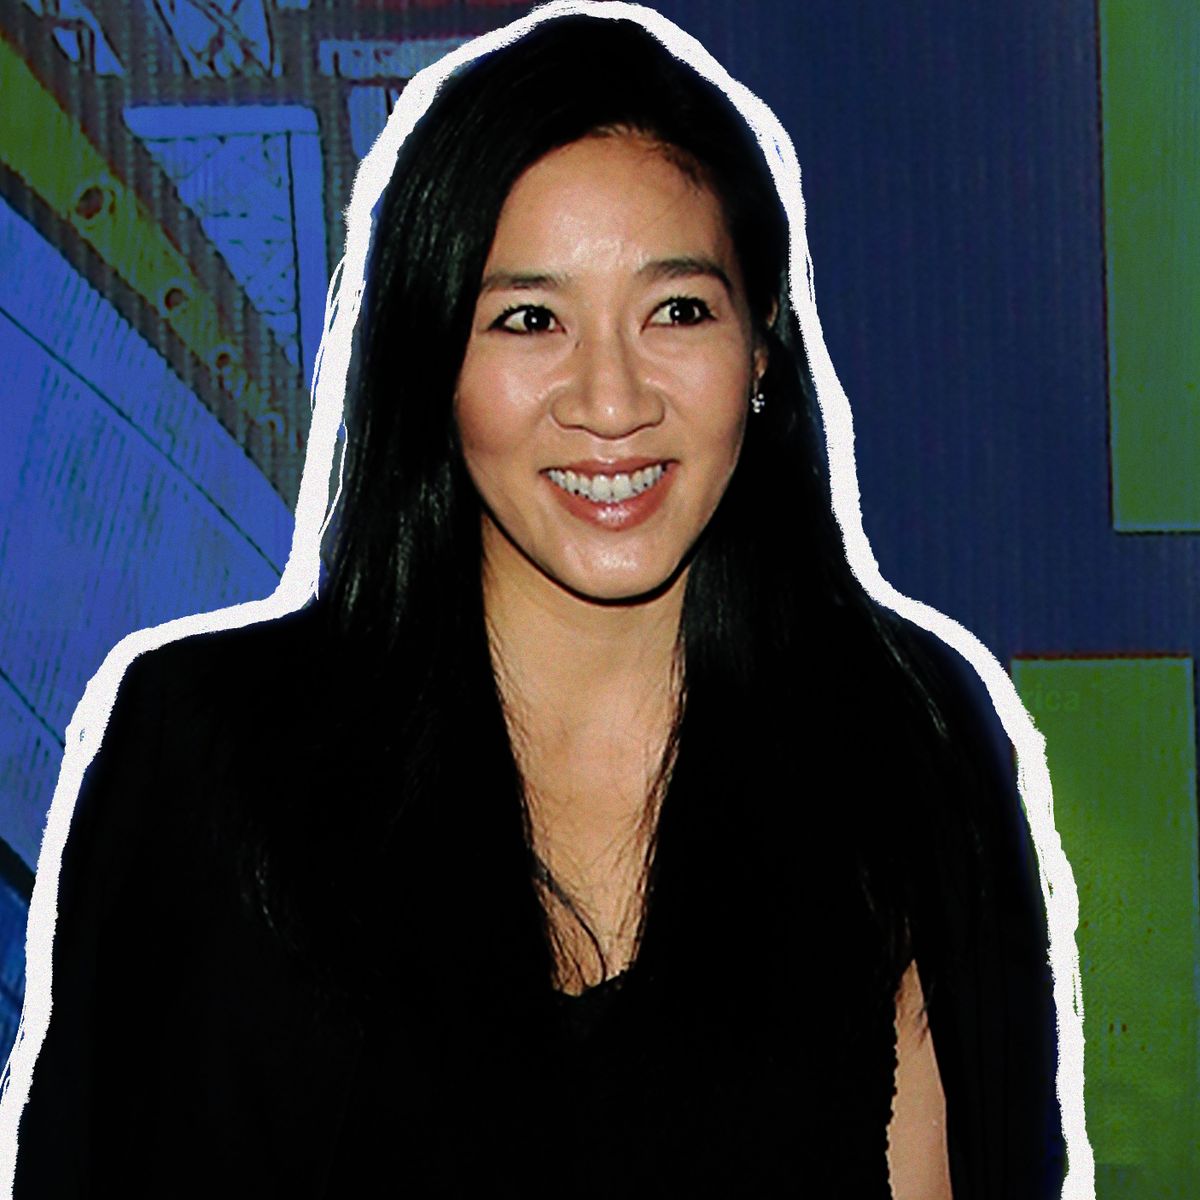 into the history of michelle kwan and her life